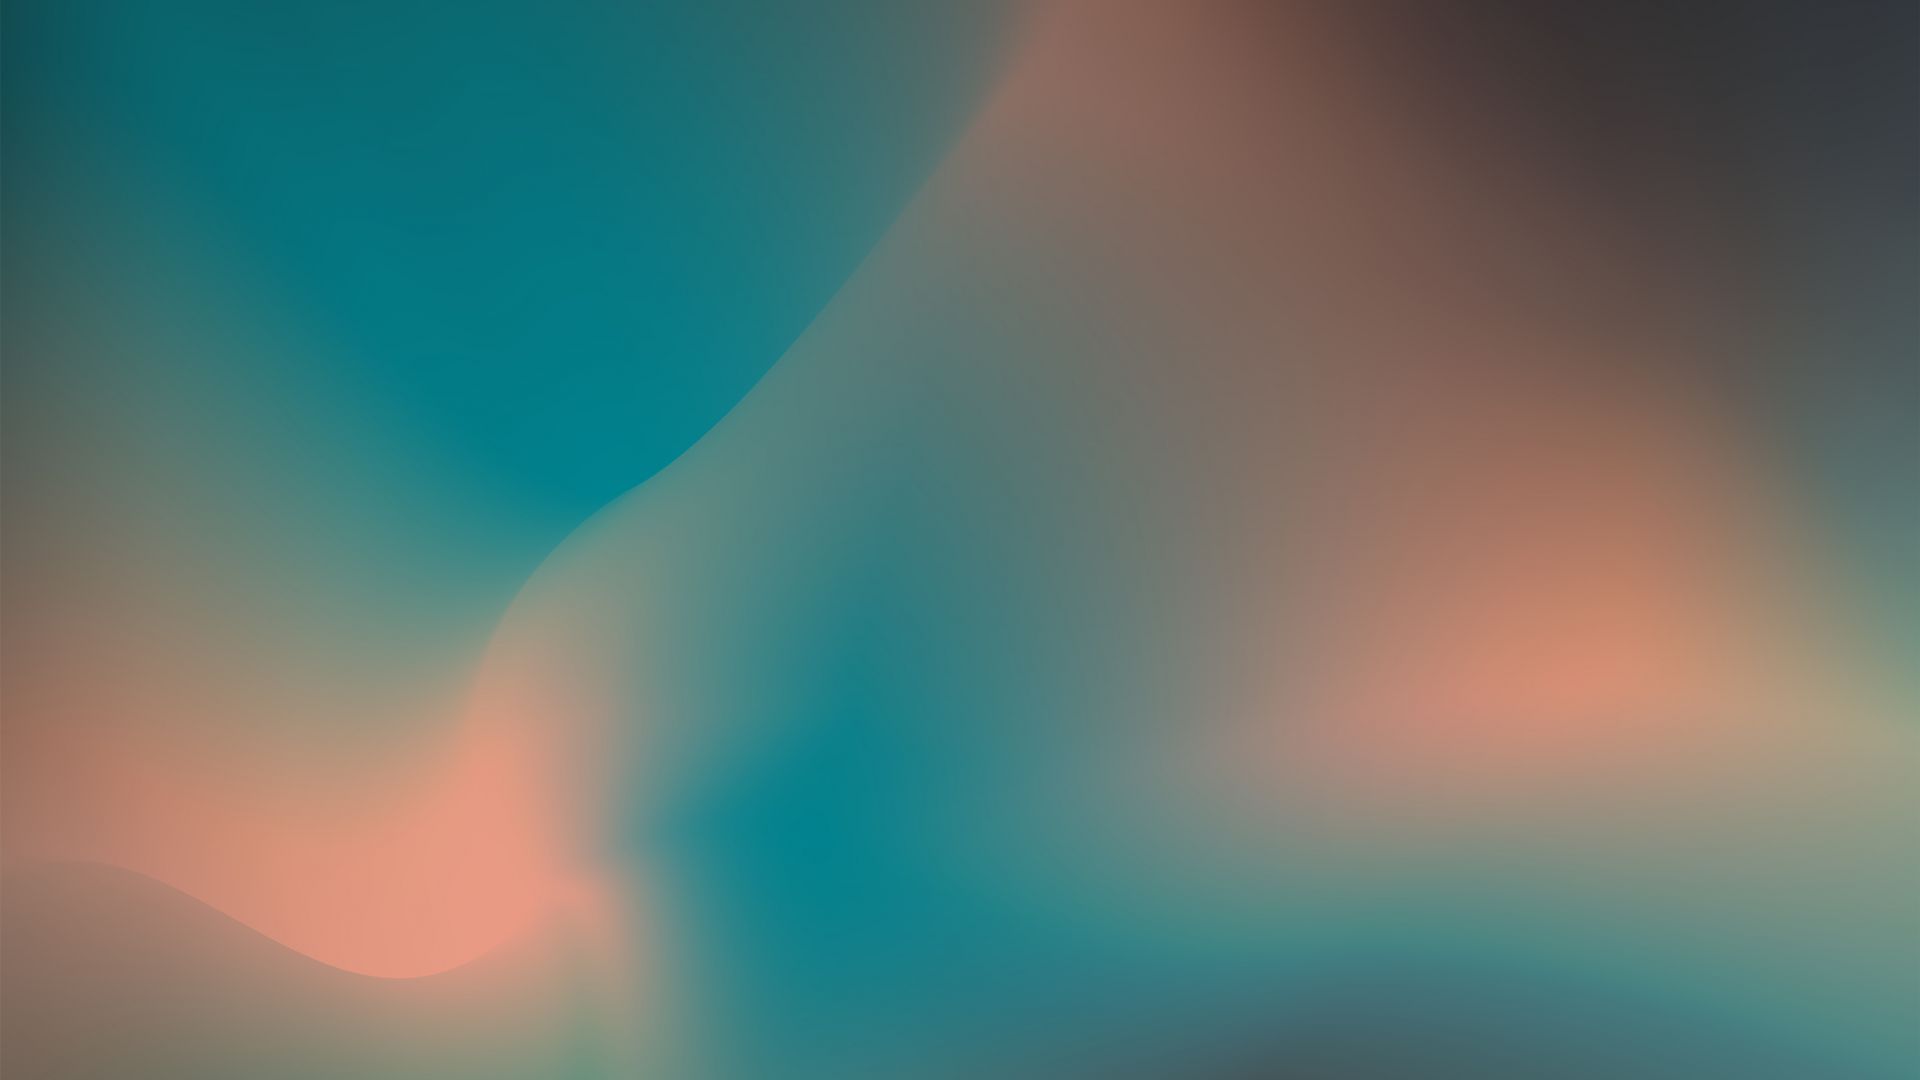 Google Pixel 3, Android 9 Pie, abstract, 4K (horizontal)